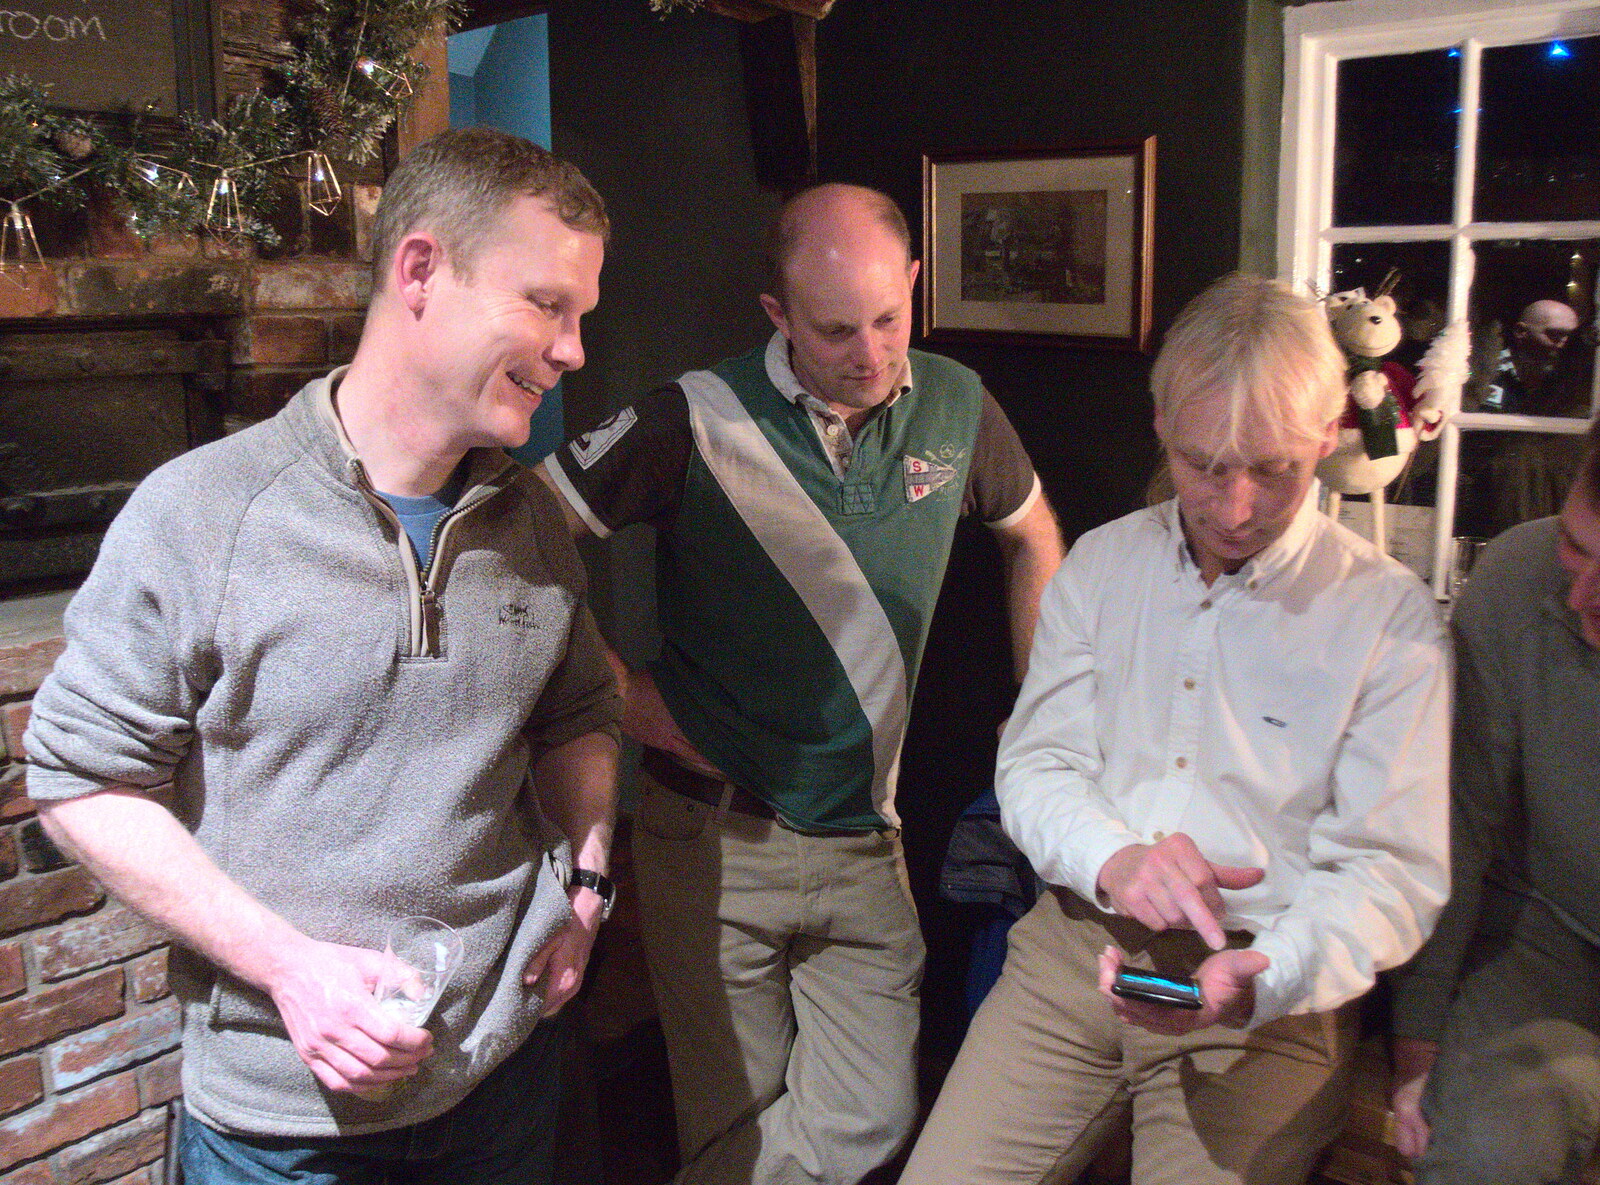 Jimmy checks his phone from A Pub Crawl and Christmas Lights, Thornham, Cotton, Bacton and Eye, Suffolk - 7th December 2018